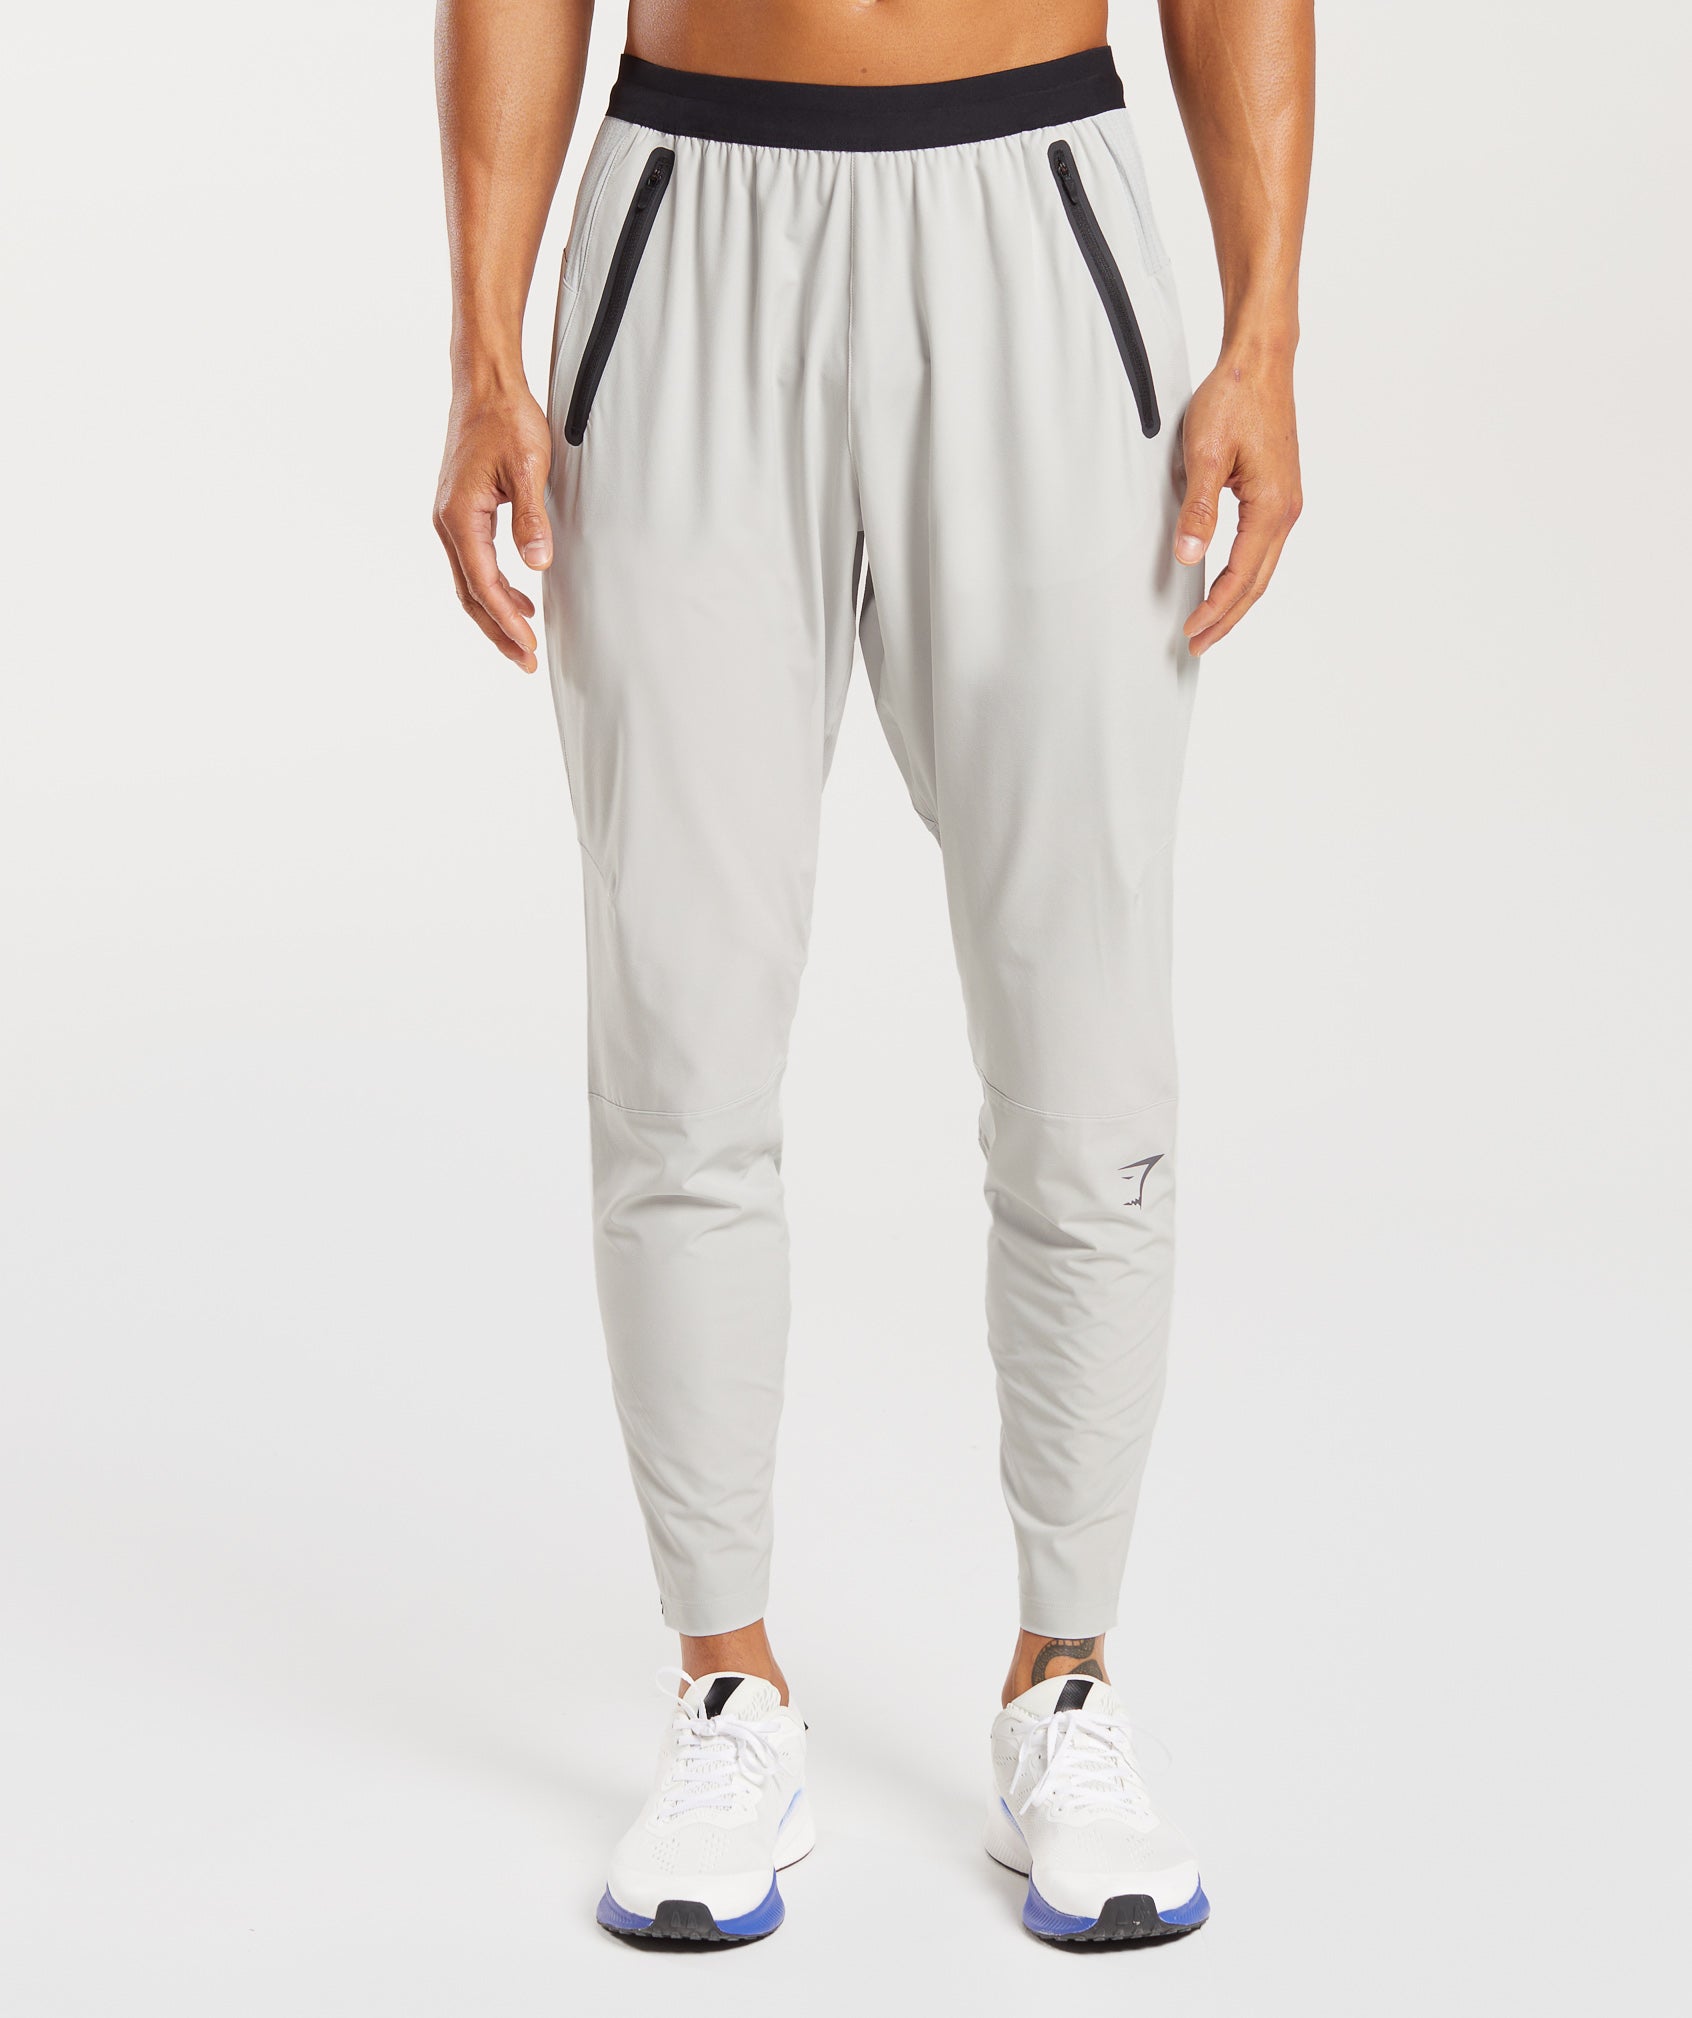 Gymshark Arrival Woven Joggers - Silhouette Grey